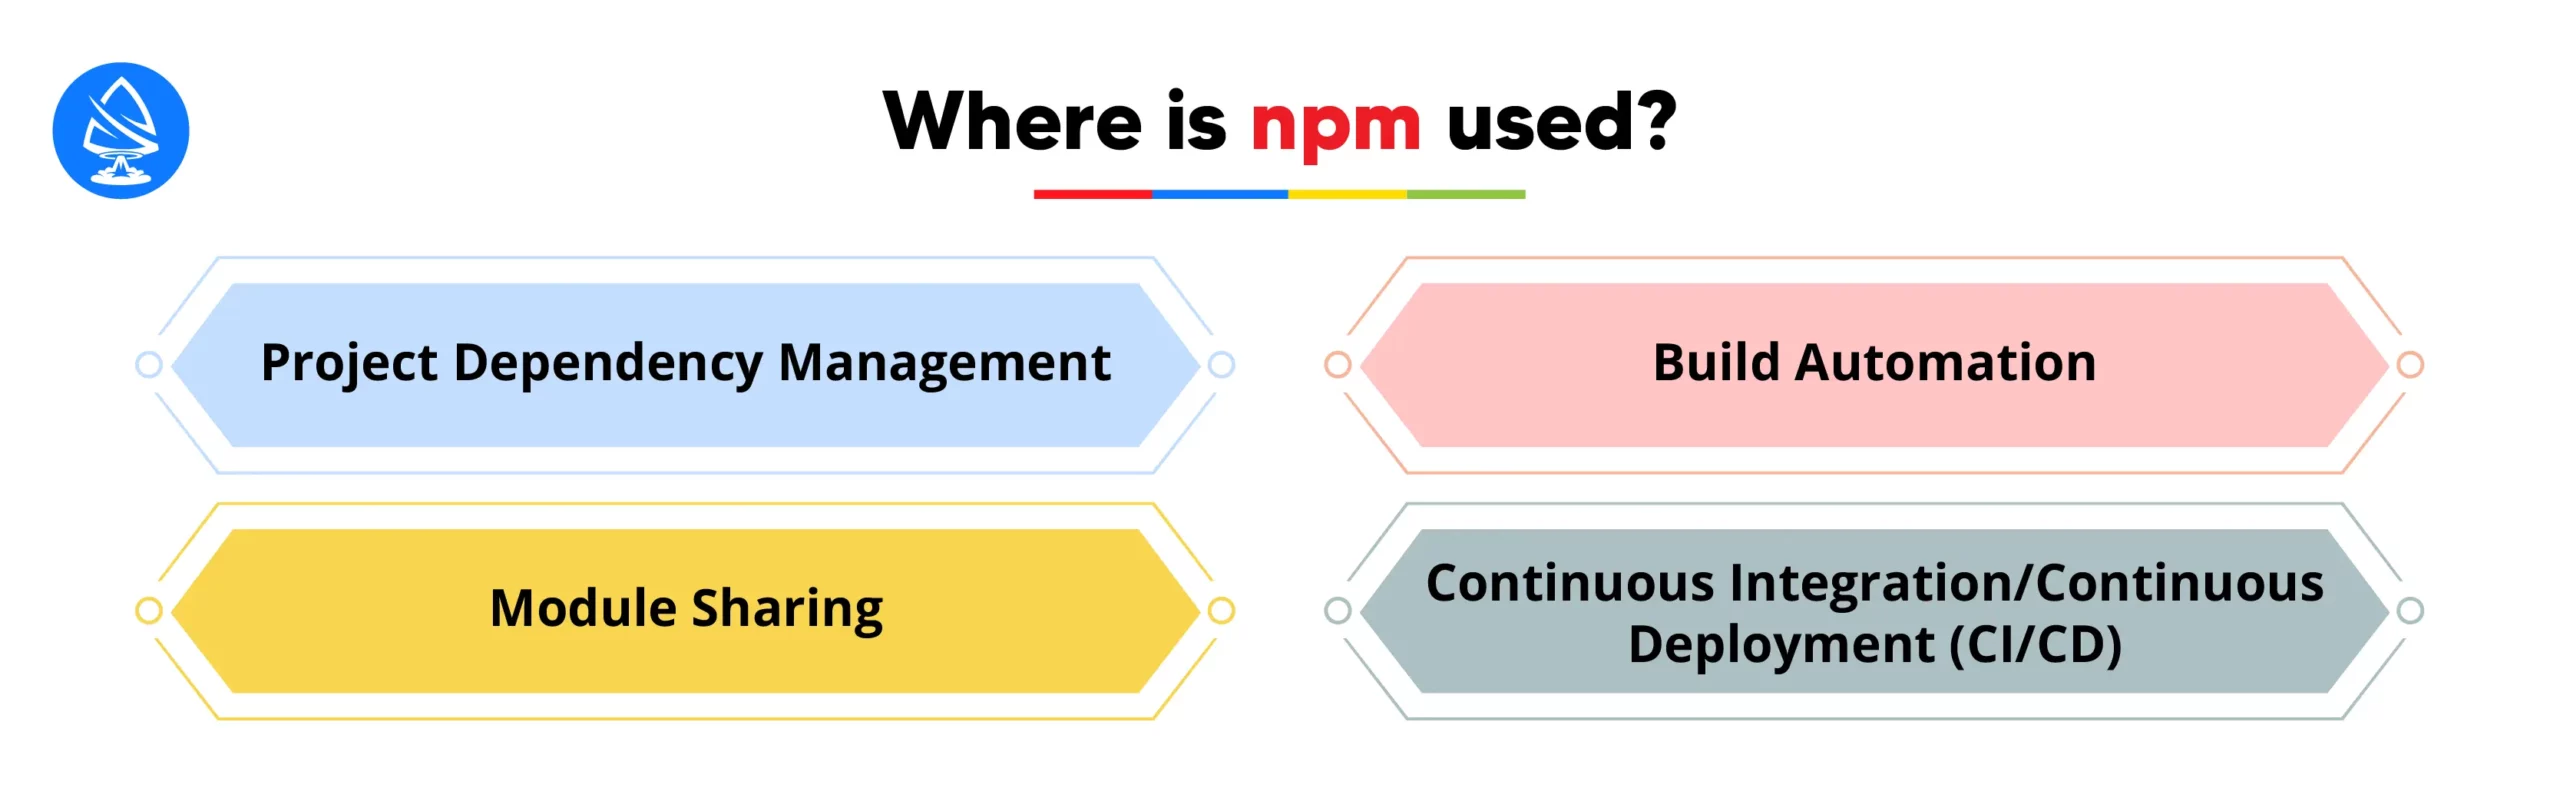 Where is npm used? 